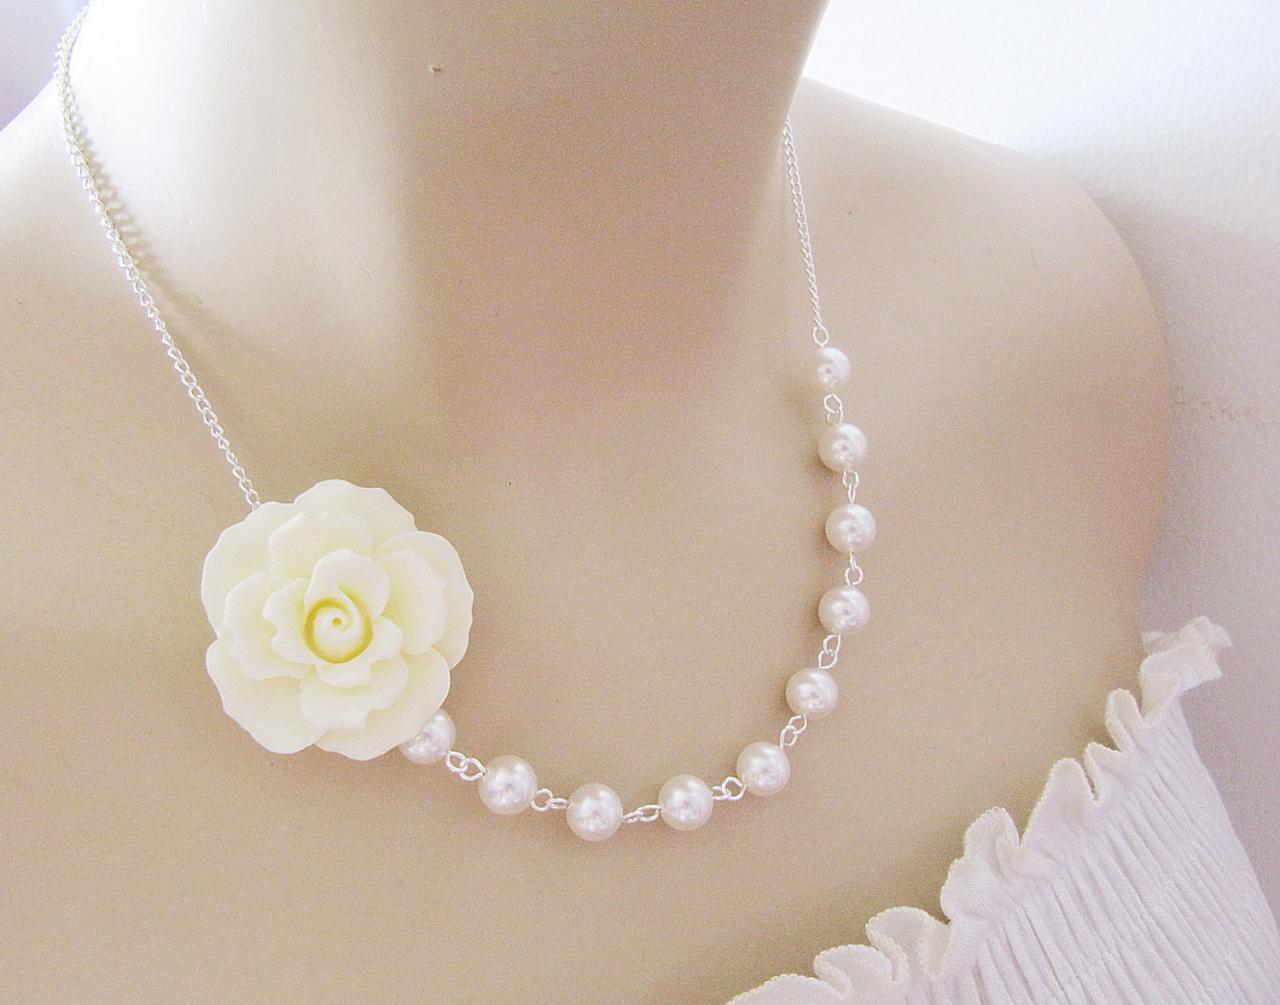 Wedding Jewelry Bridal Jewelry Bridal Necklace Bridesmaid Necklace Cream Ruffle Rose Flower Cabochon And Crystal White Swarovski Pearls